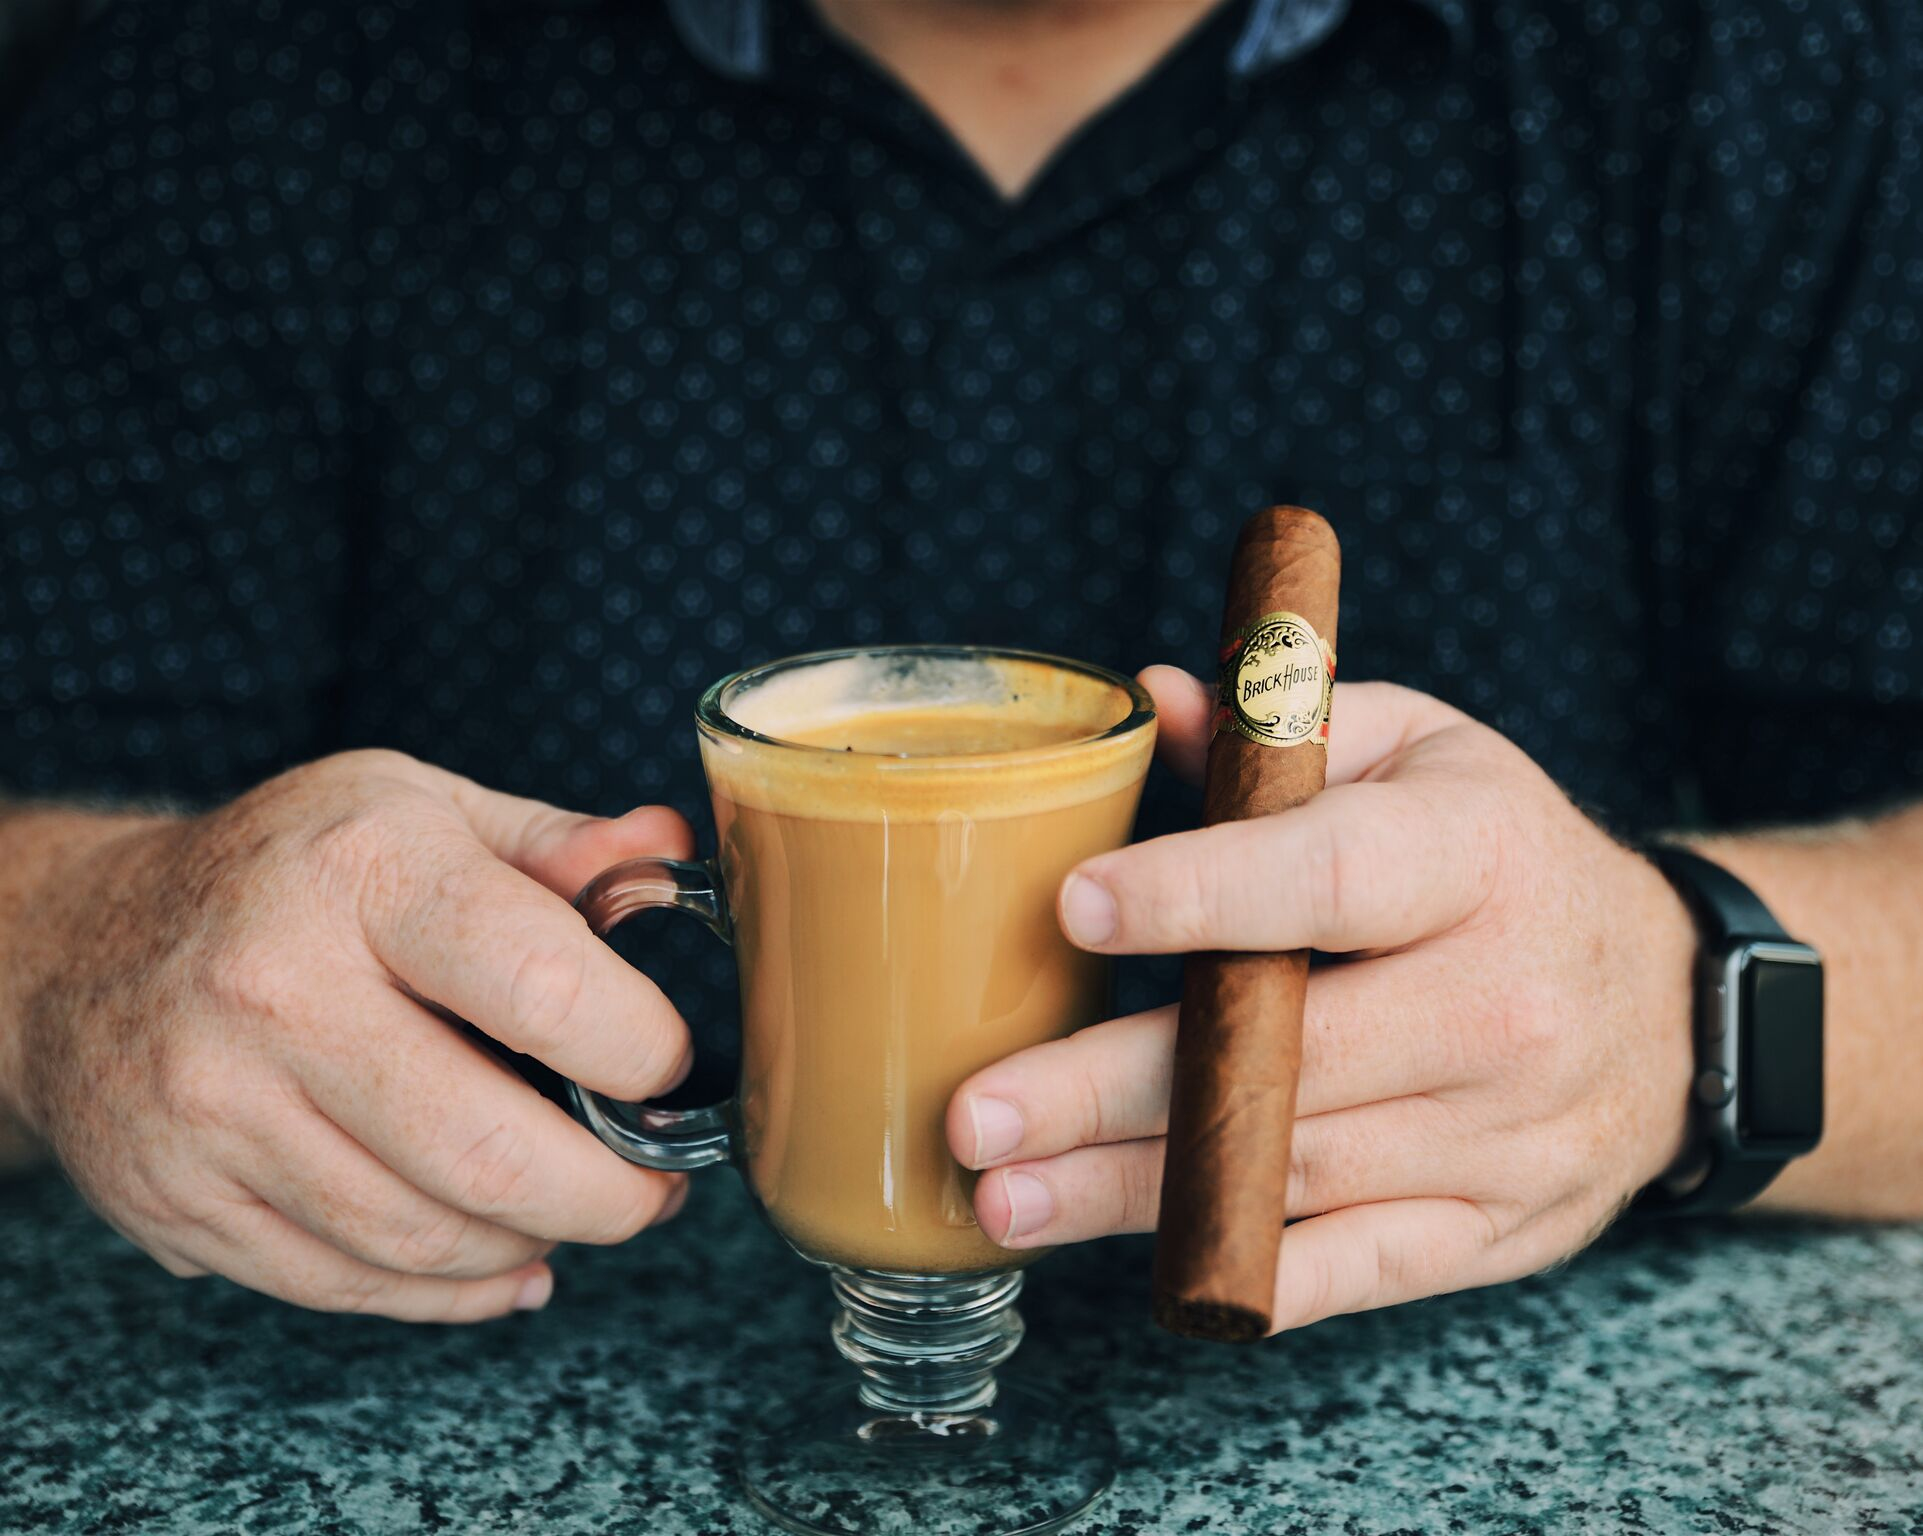 Artistic representation of a men enjoying a Brick House Premium Cigars and a Cup of Coffee